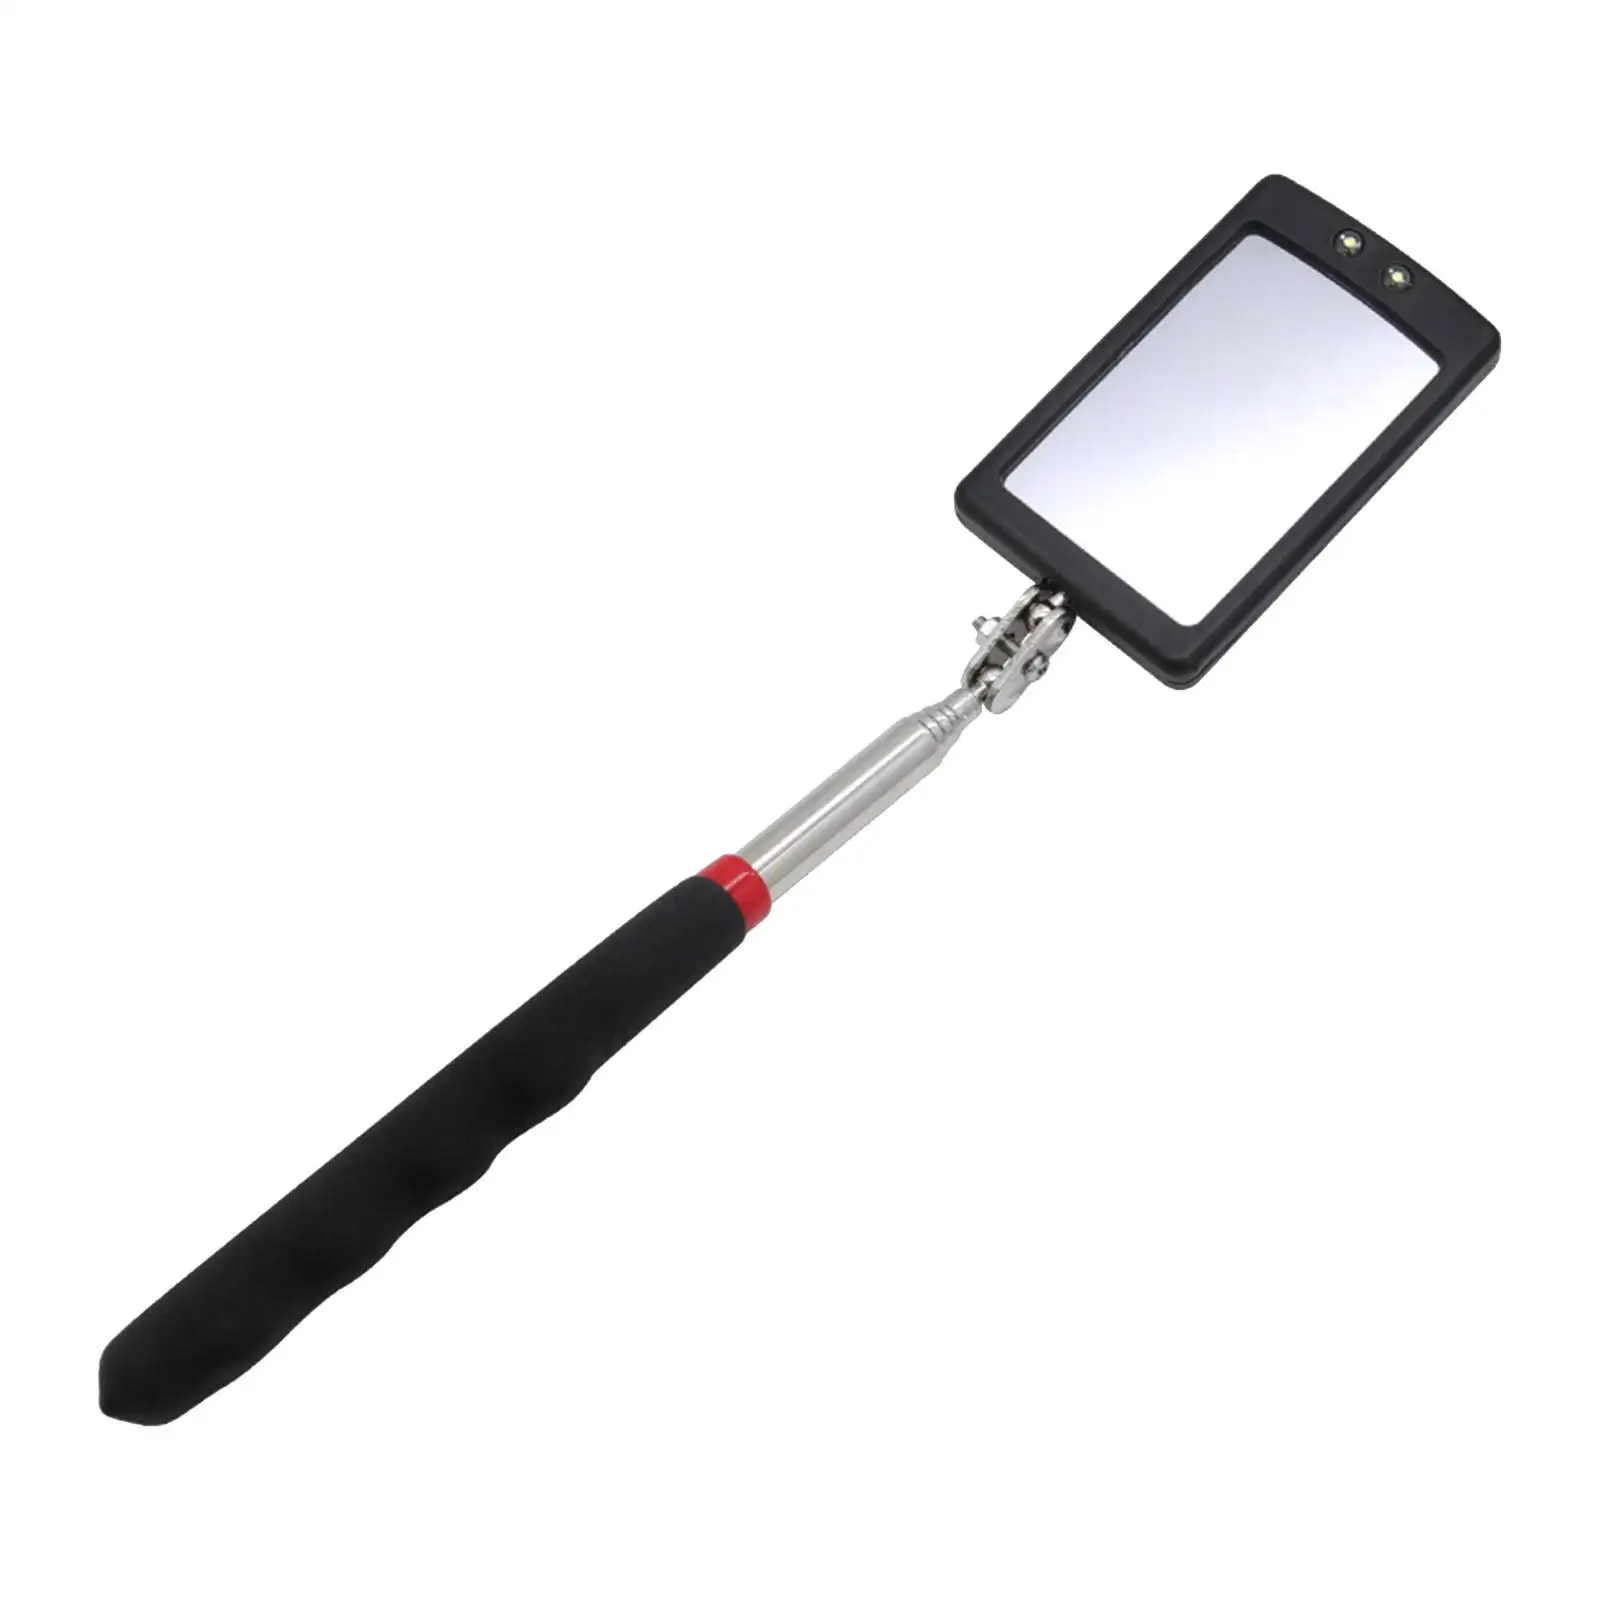 Inspection Mirror Extendable Adjustable with LED for Industrial Eyelashes Small Parts Observation Home Inspector Home Use